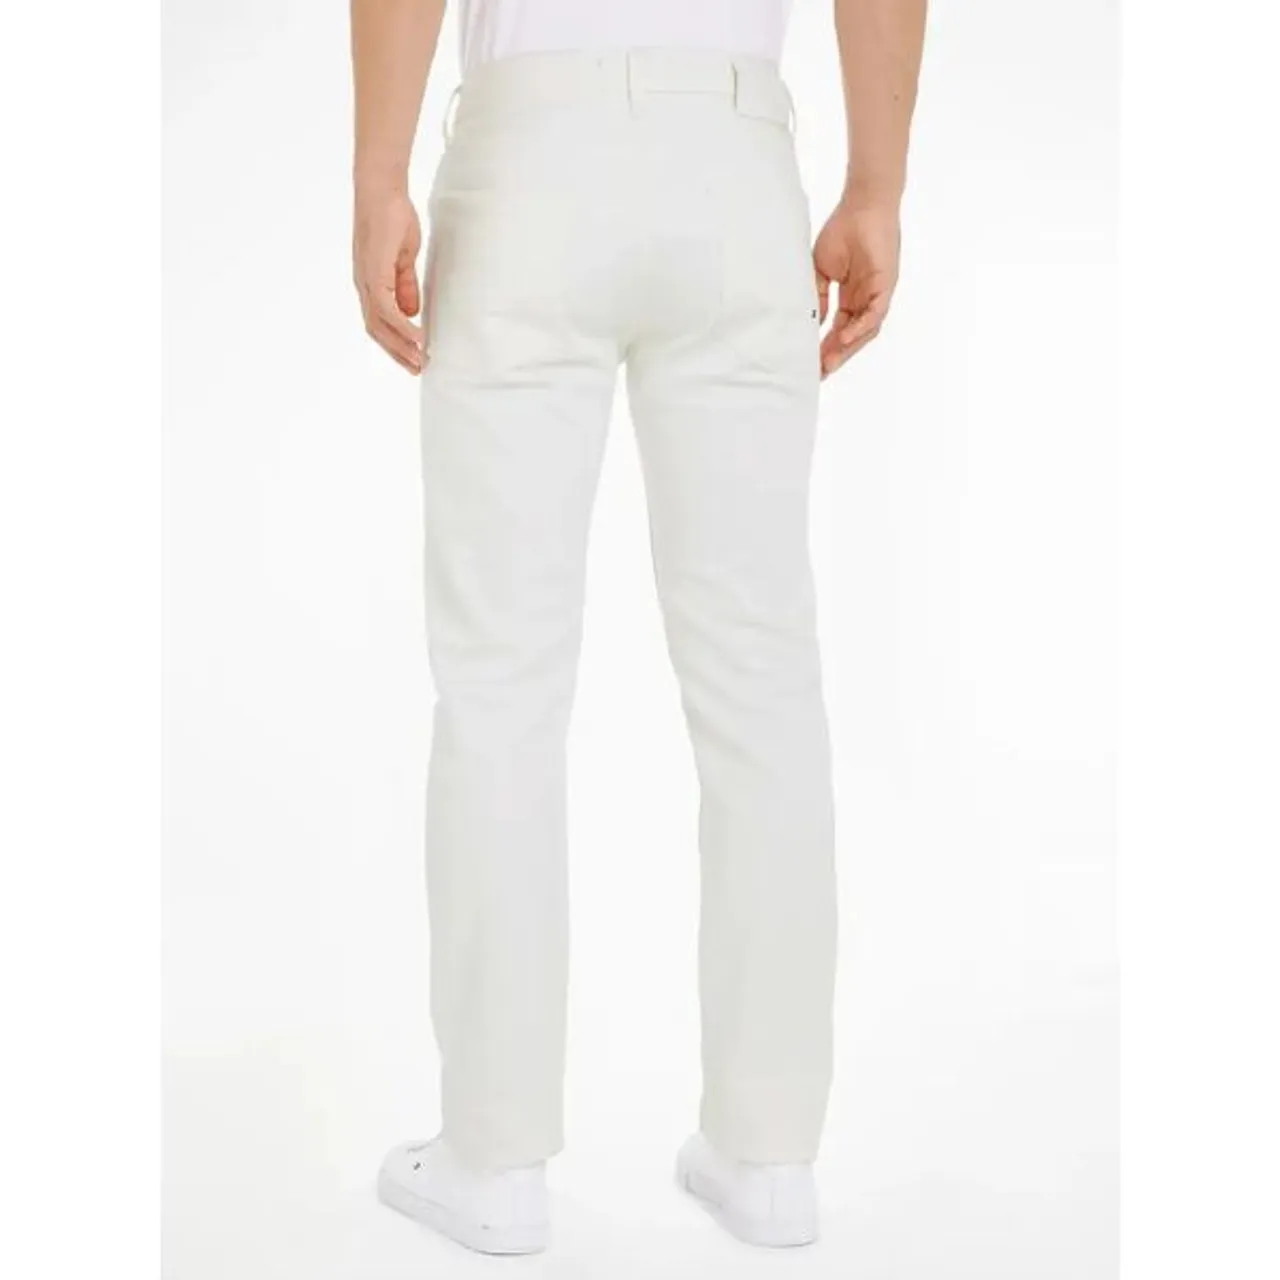 Tommy Hilfiger Denton Straight Jeans, Gale White - Gale White - Male